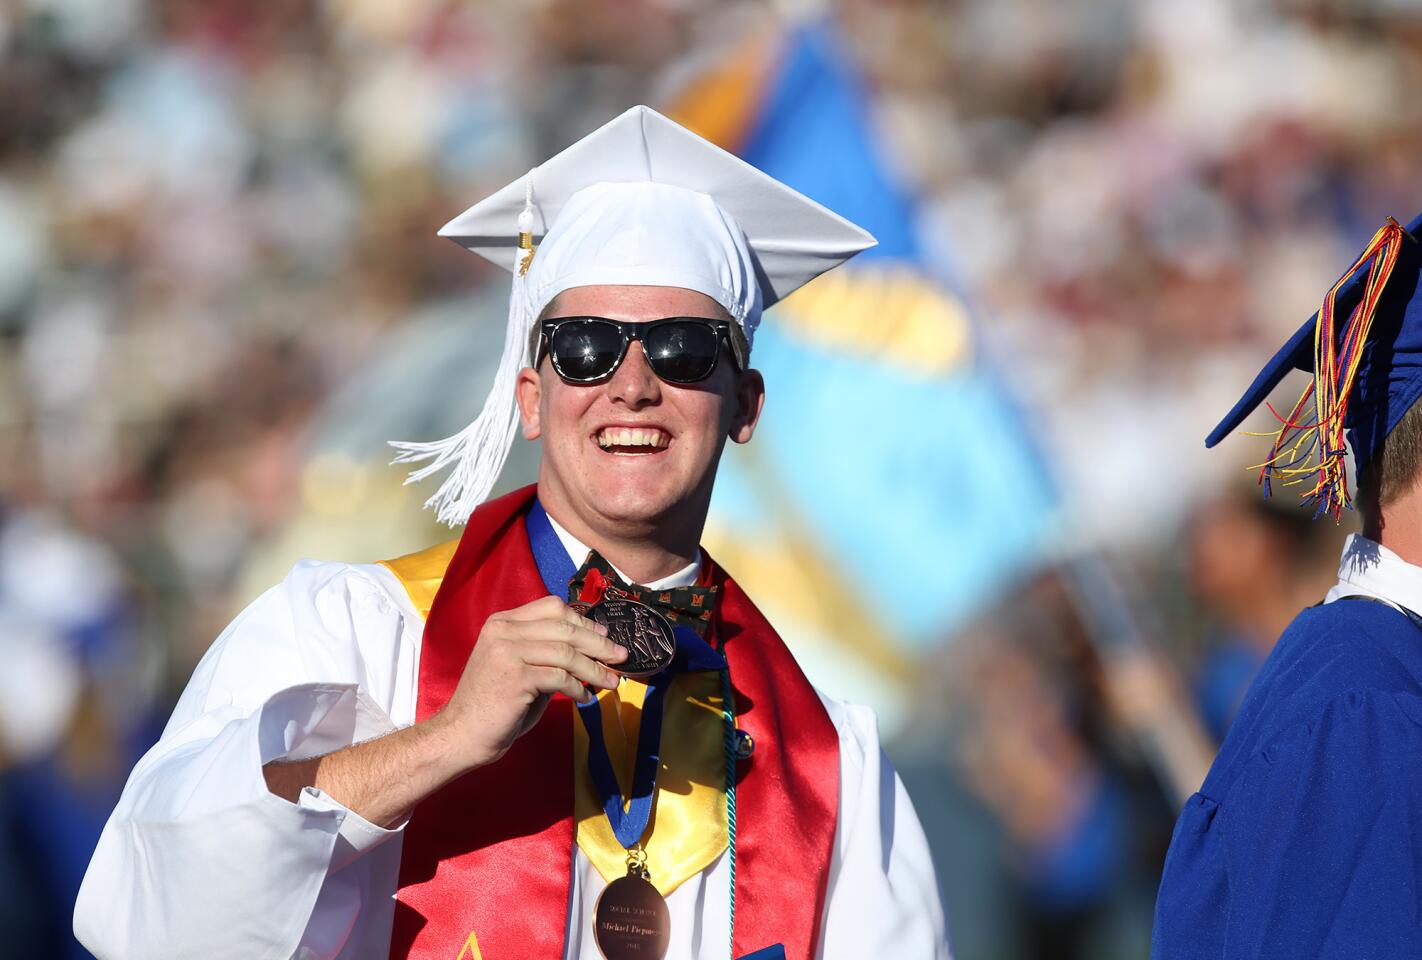 Graduate Michael Piepmeyer smiles to his family in the audience during the 2018 Fountain Valley High School commencement ceremony Wednesday at Orange Coast College in Costa Mesa.